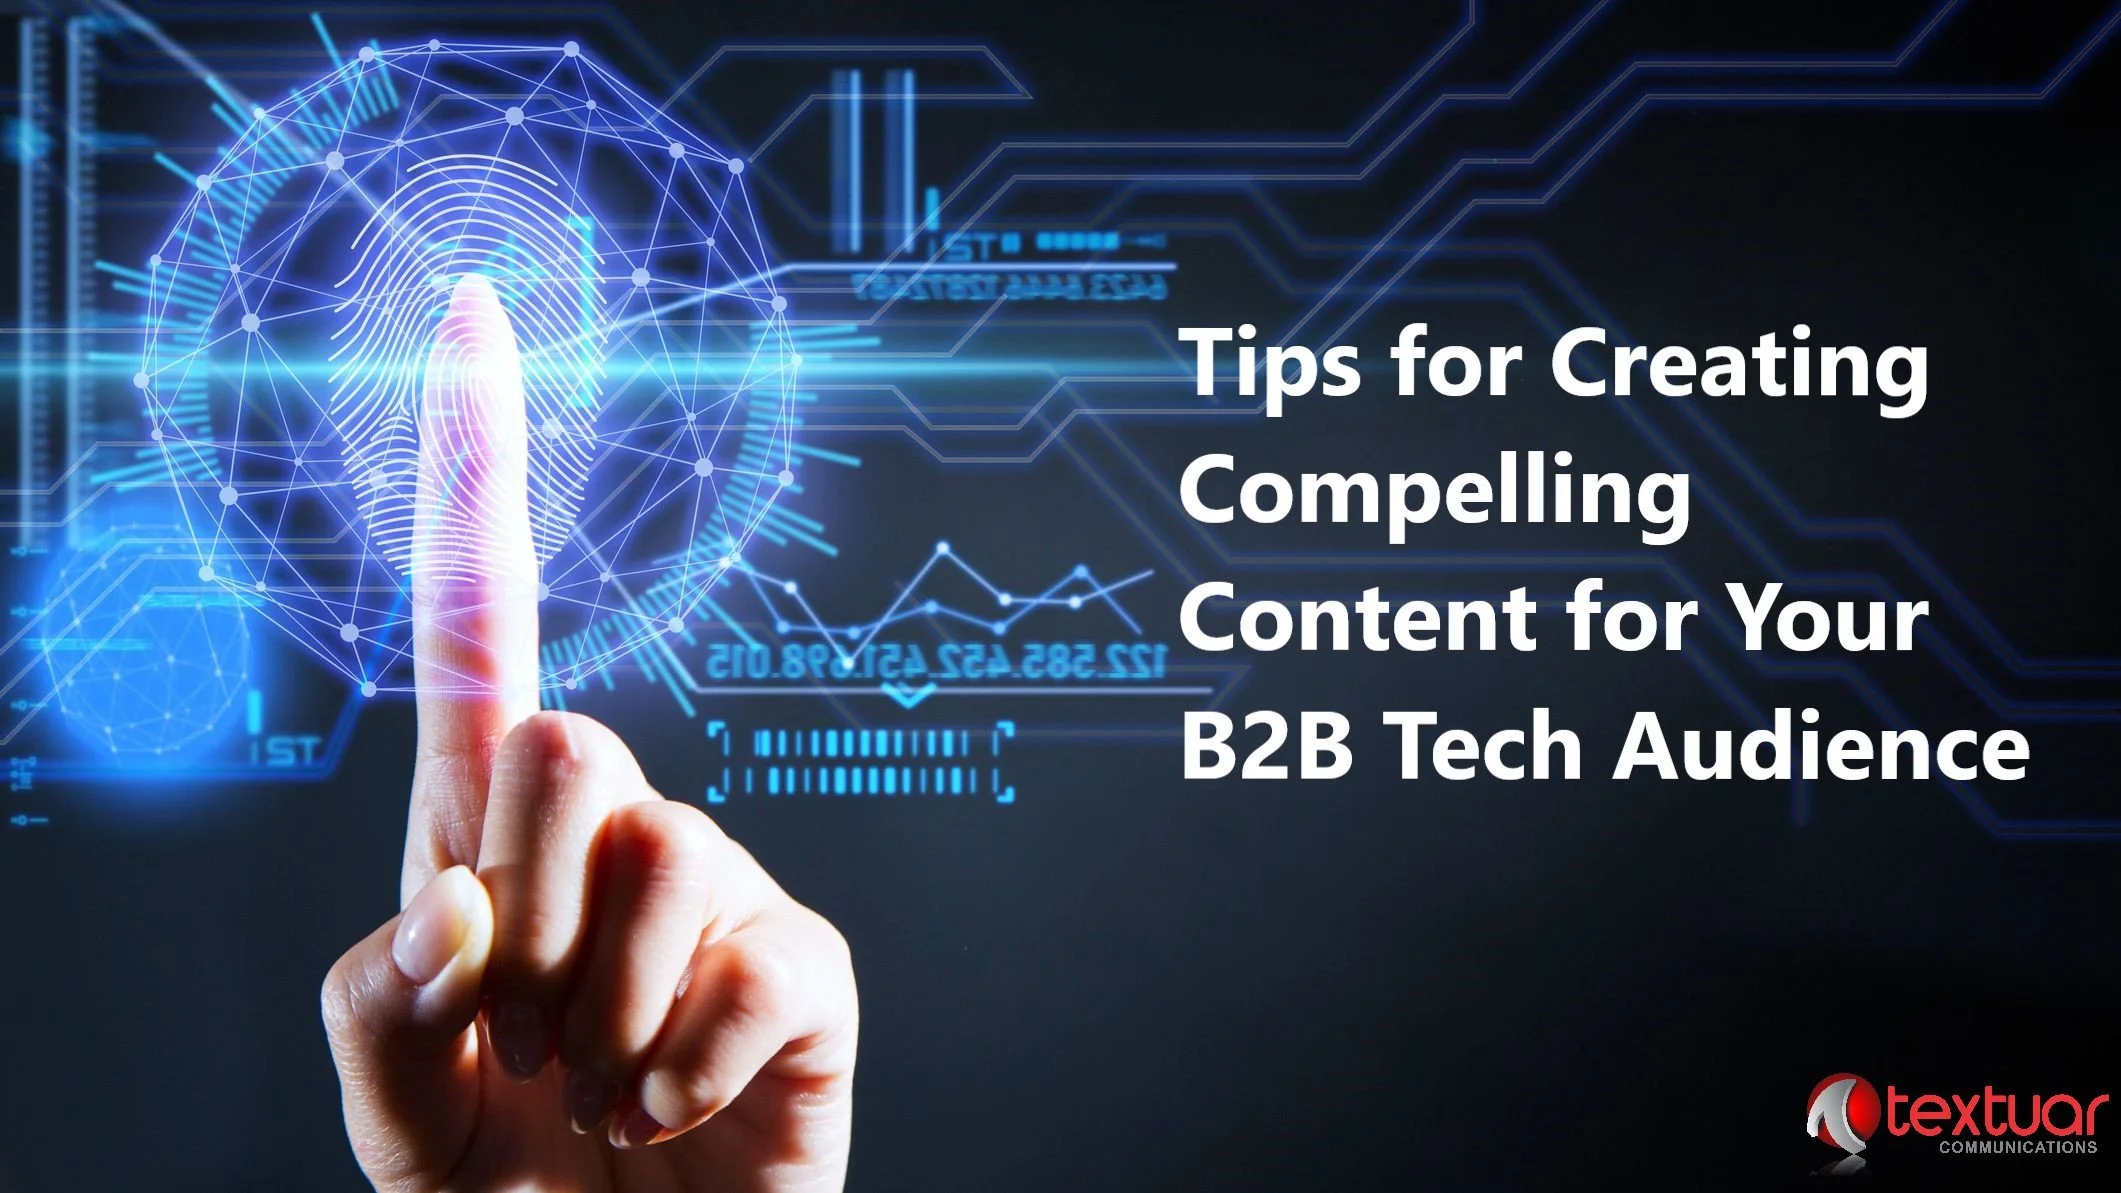 B2B content writing for technology